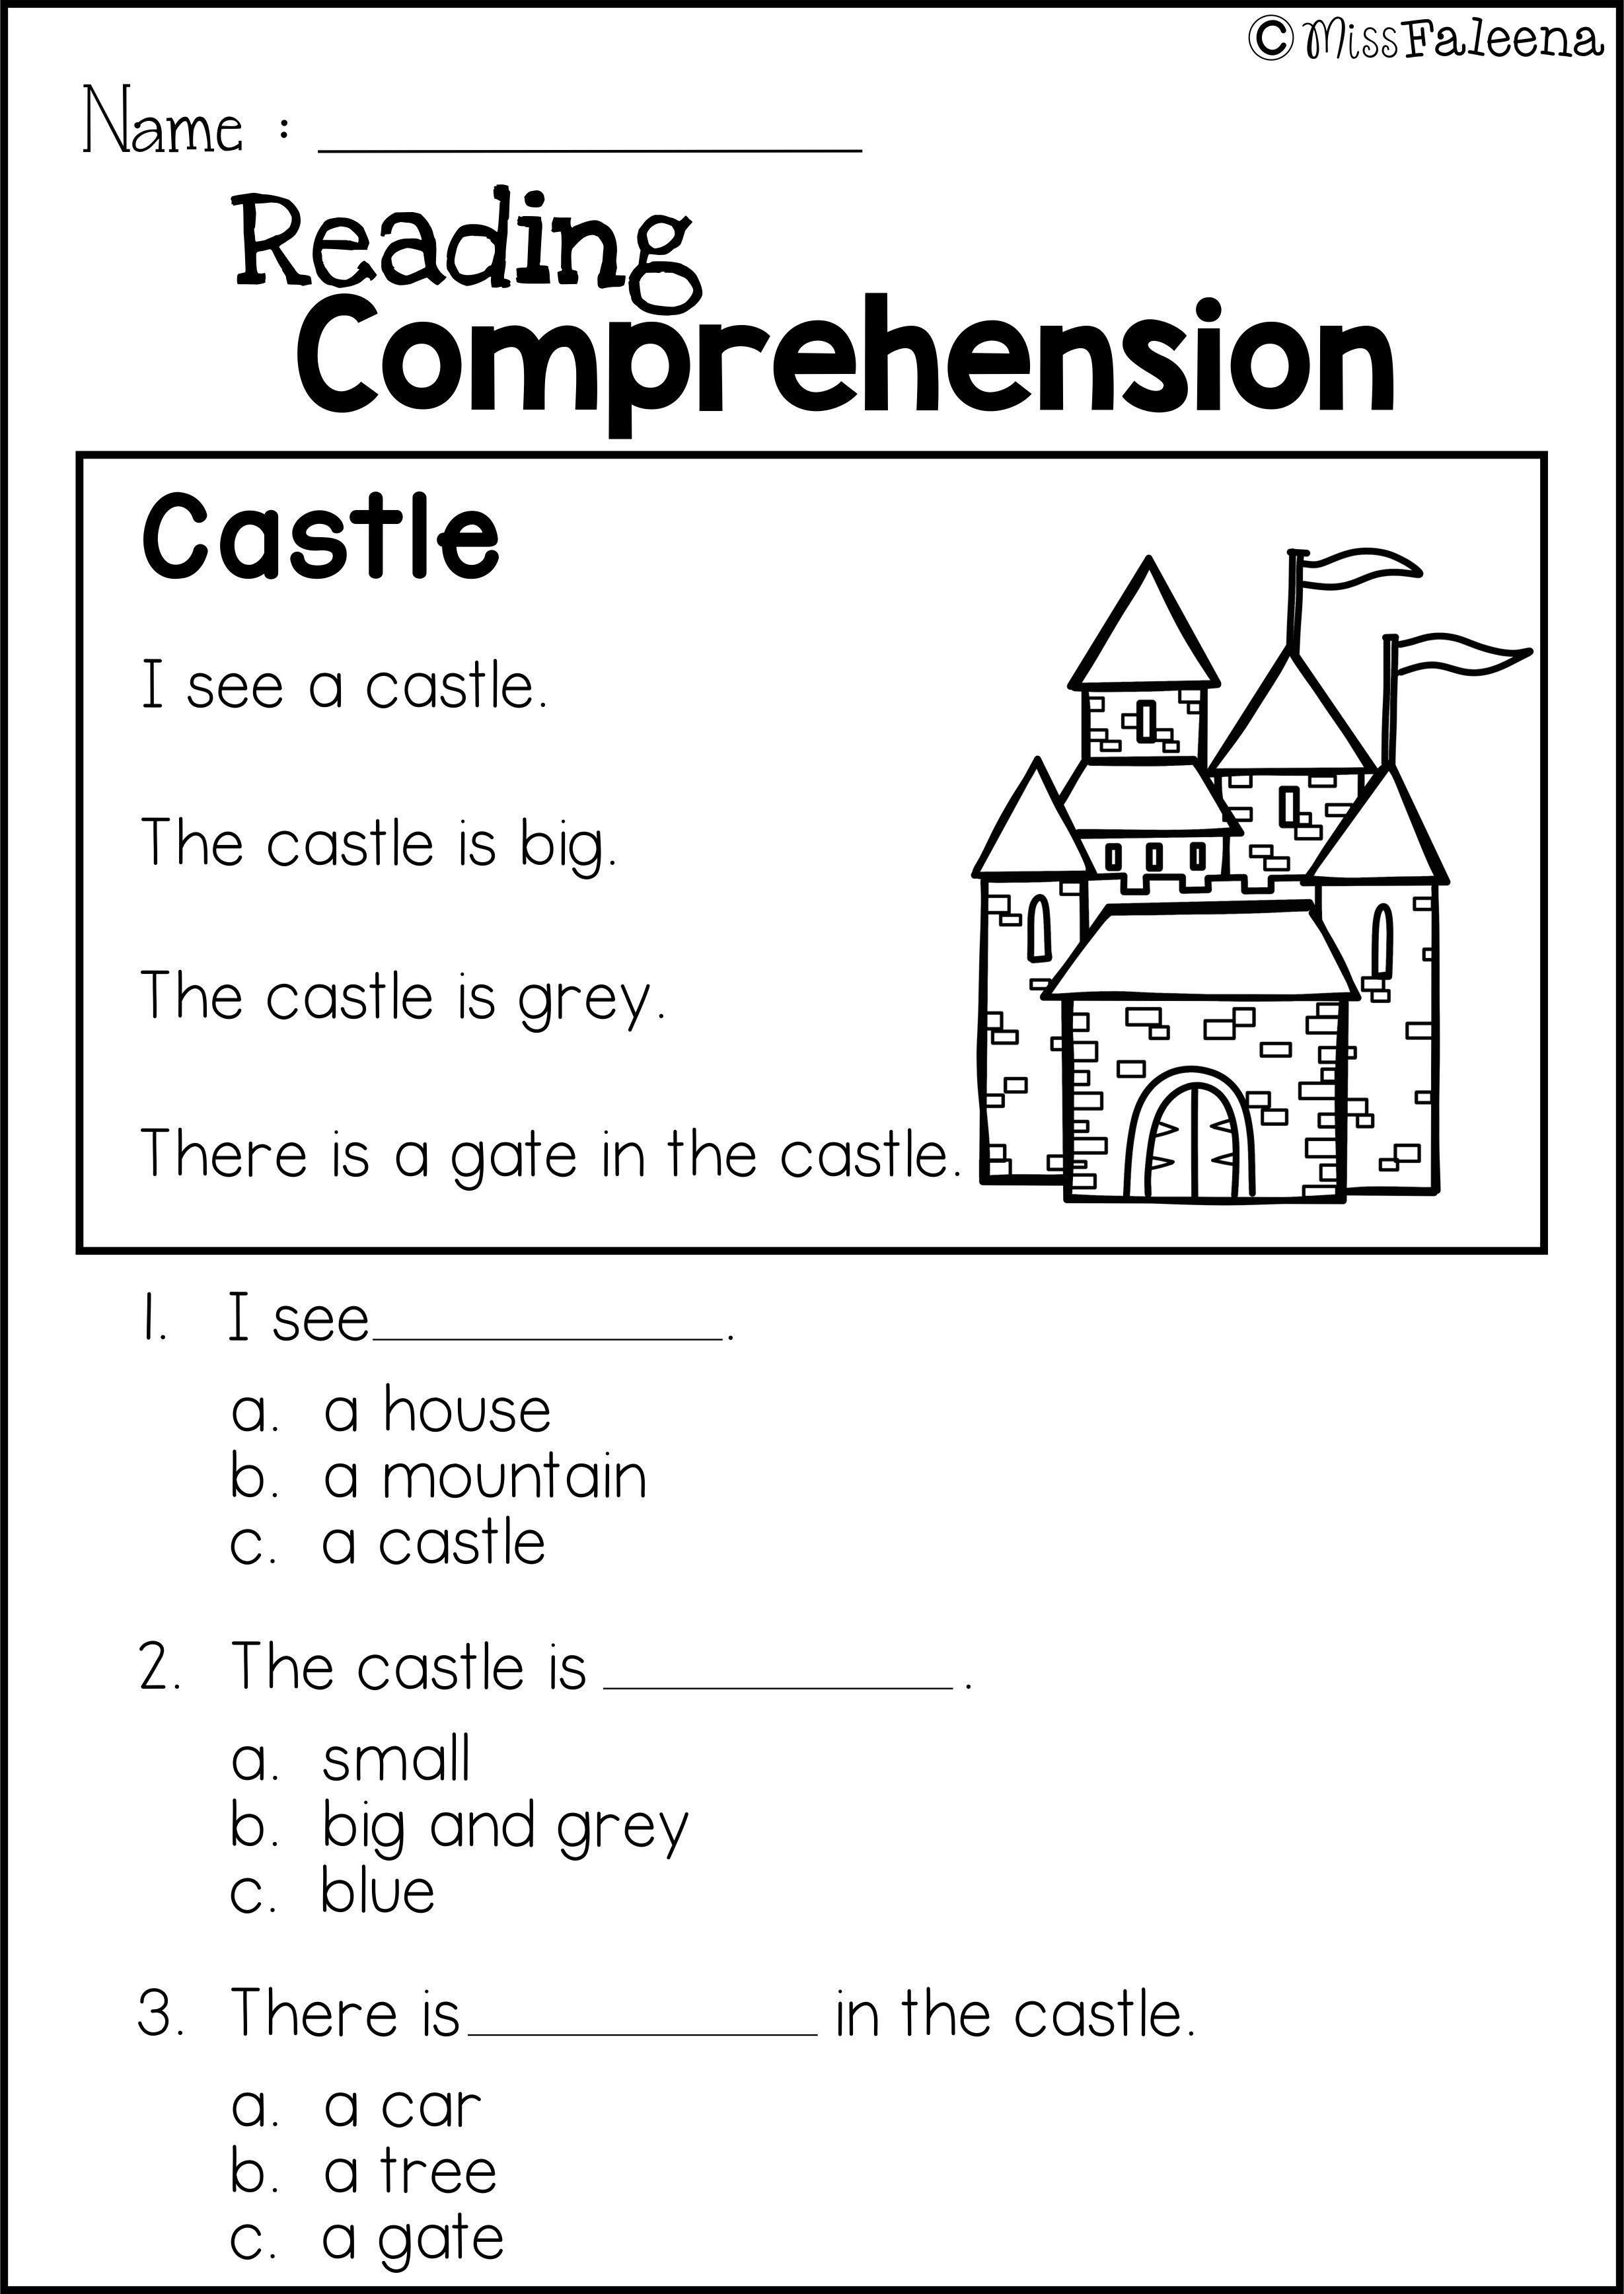 Kindergarten Preschool Classroom Themes For The Year Reading Intended For Bible Reading Comprehension Worksheets